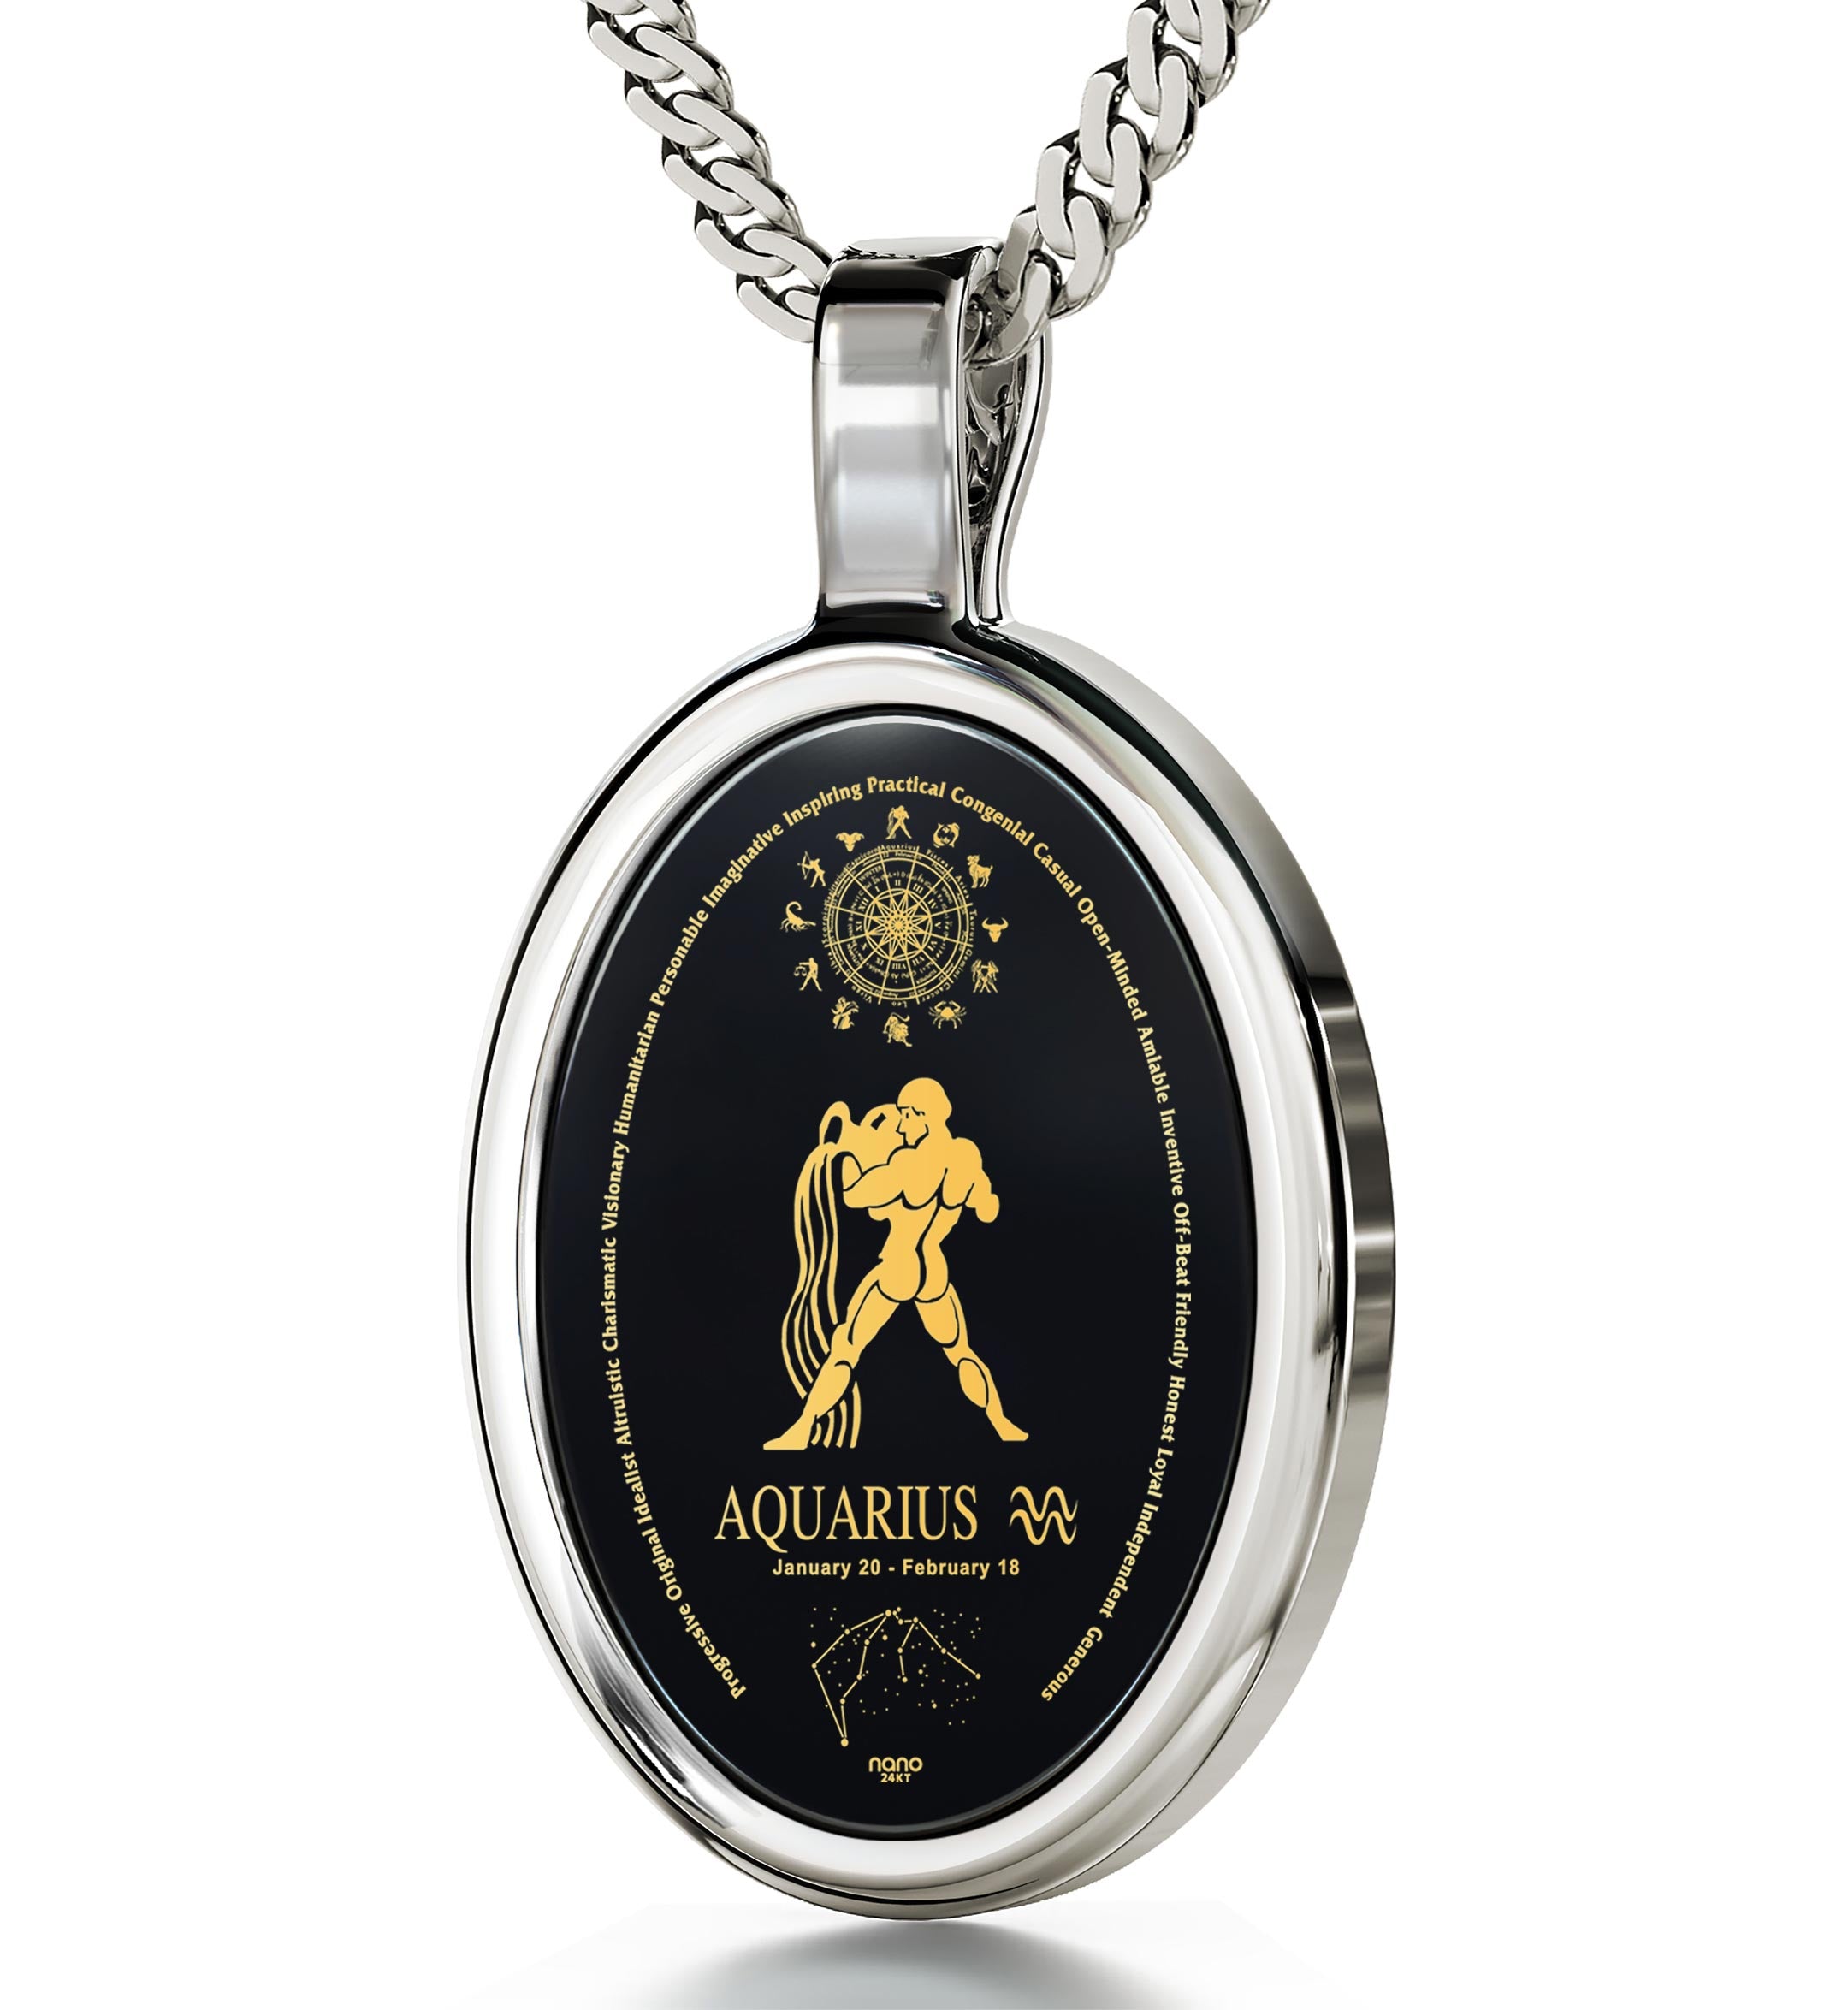 NanoStyle Only Necklace Unique Aquarius Zodiac | 24k Gold World\'s - Jewelry Gift Inscribed